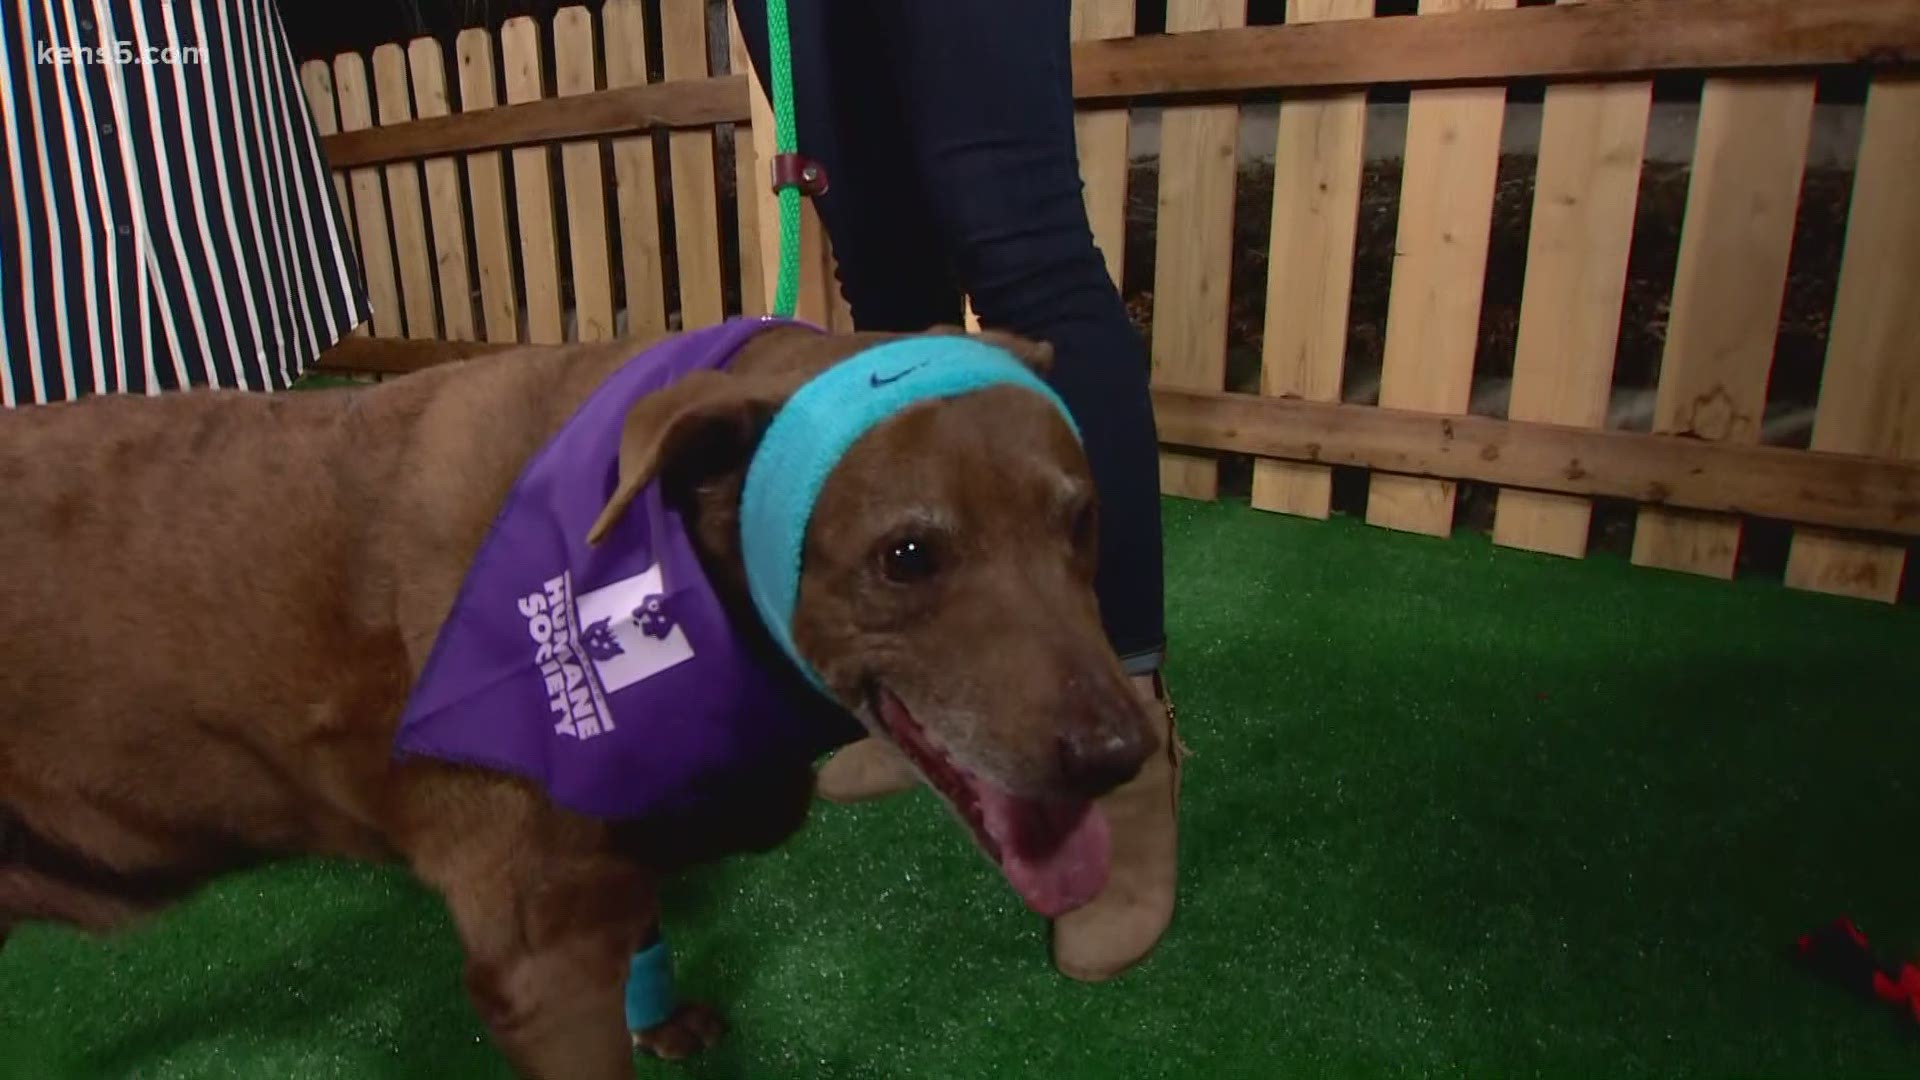 We're introducing you to our pet of the week at our KENS 5 Puppy Playground!